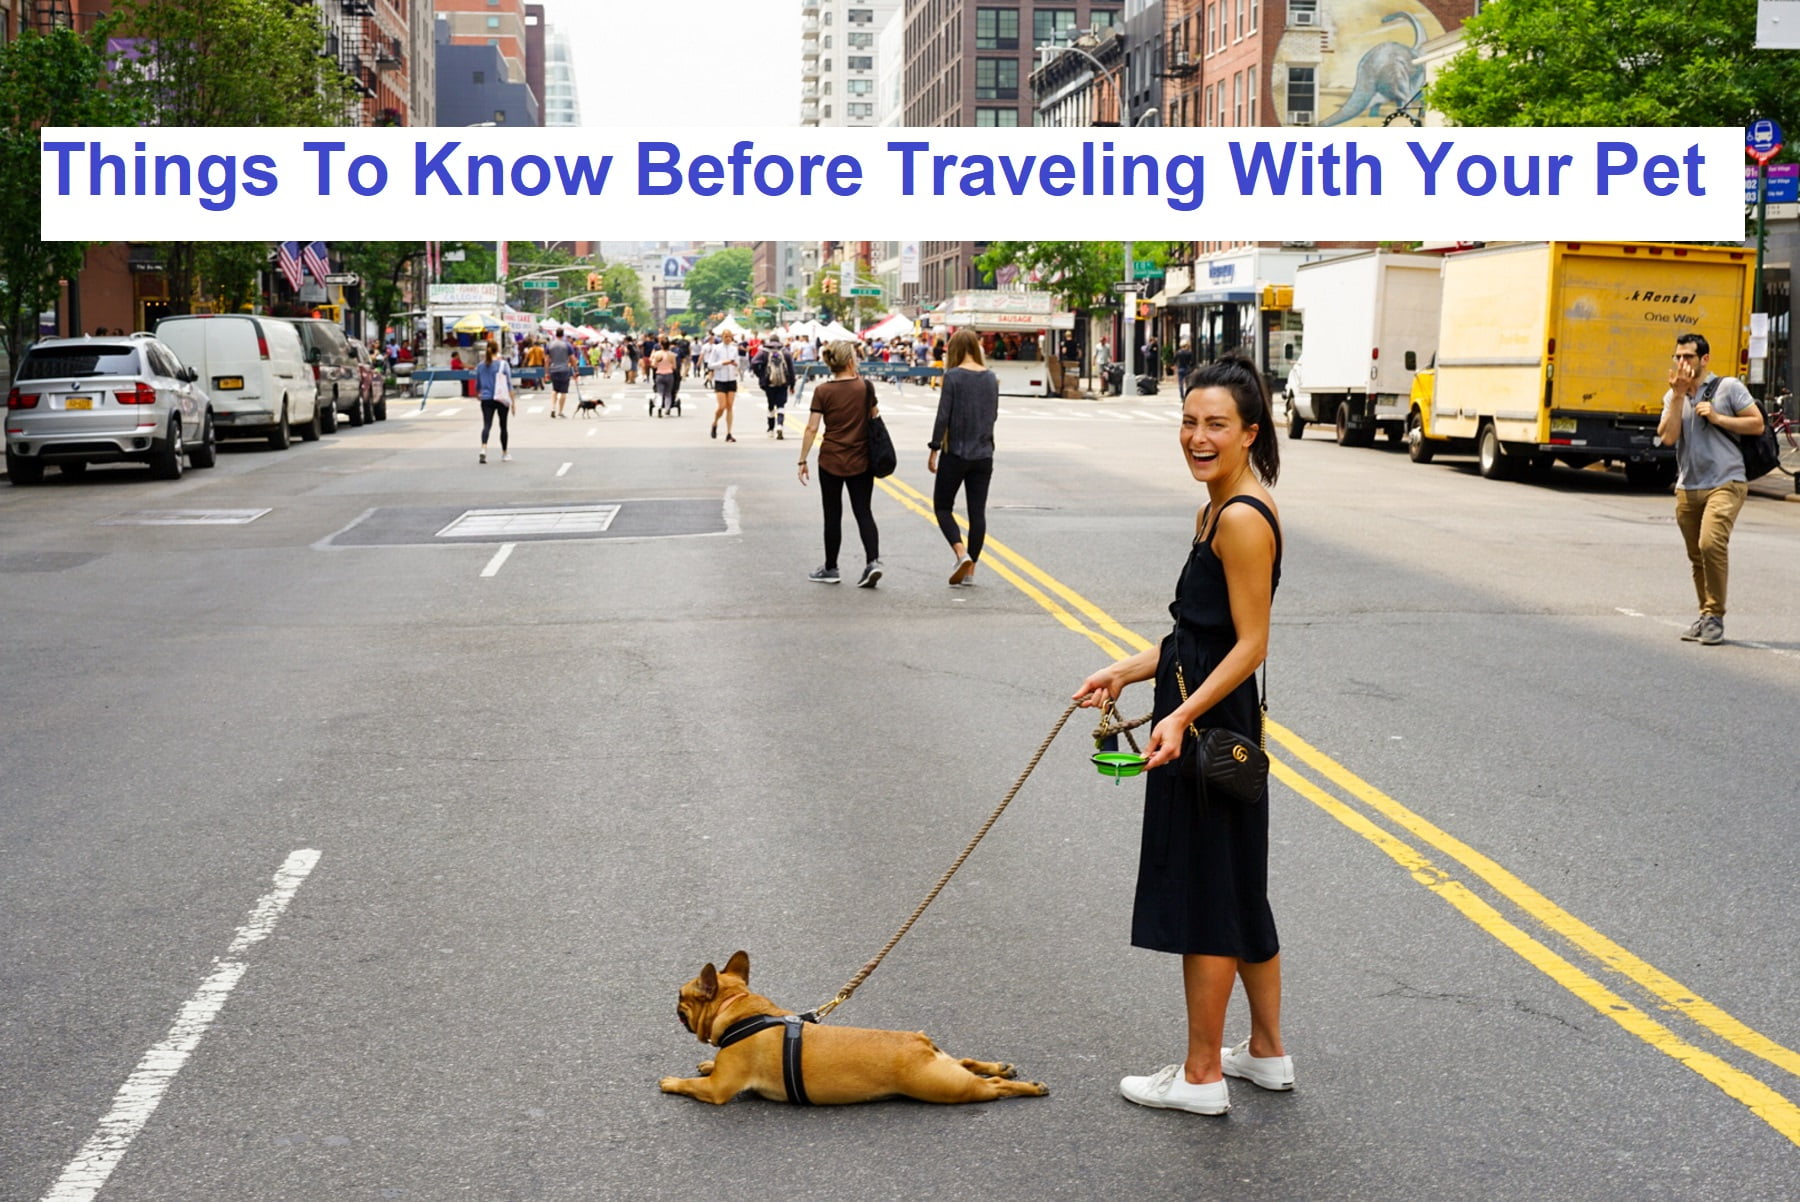 Things To Know Before Traveling With Your Pet